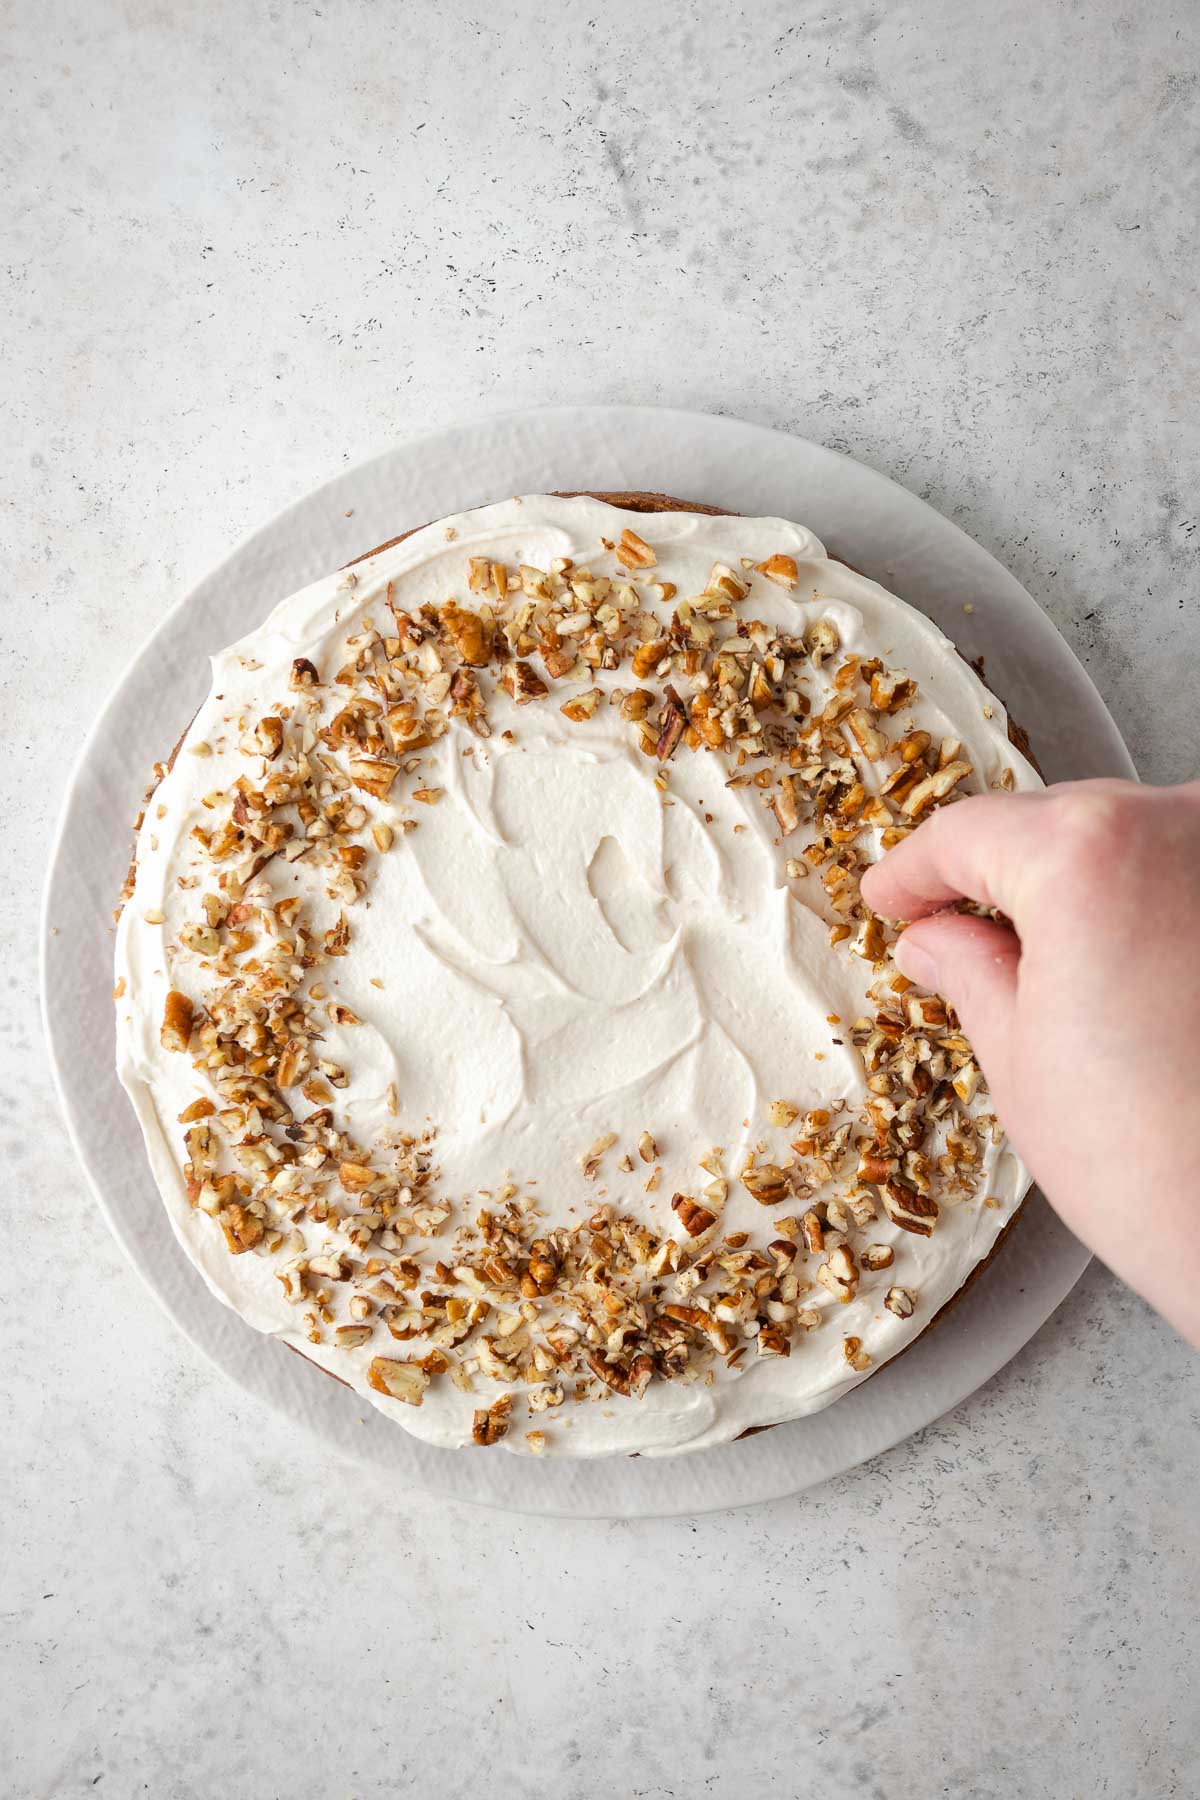 Hand sprinkling walnuts onto a frosted gluten free carrot cake.